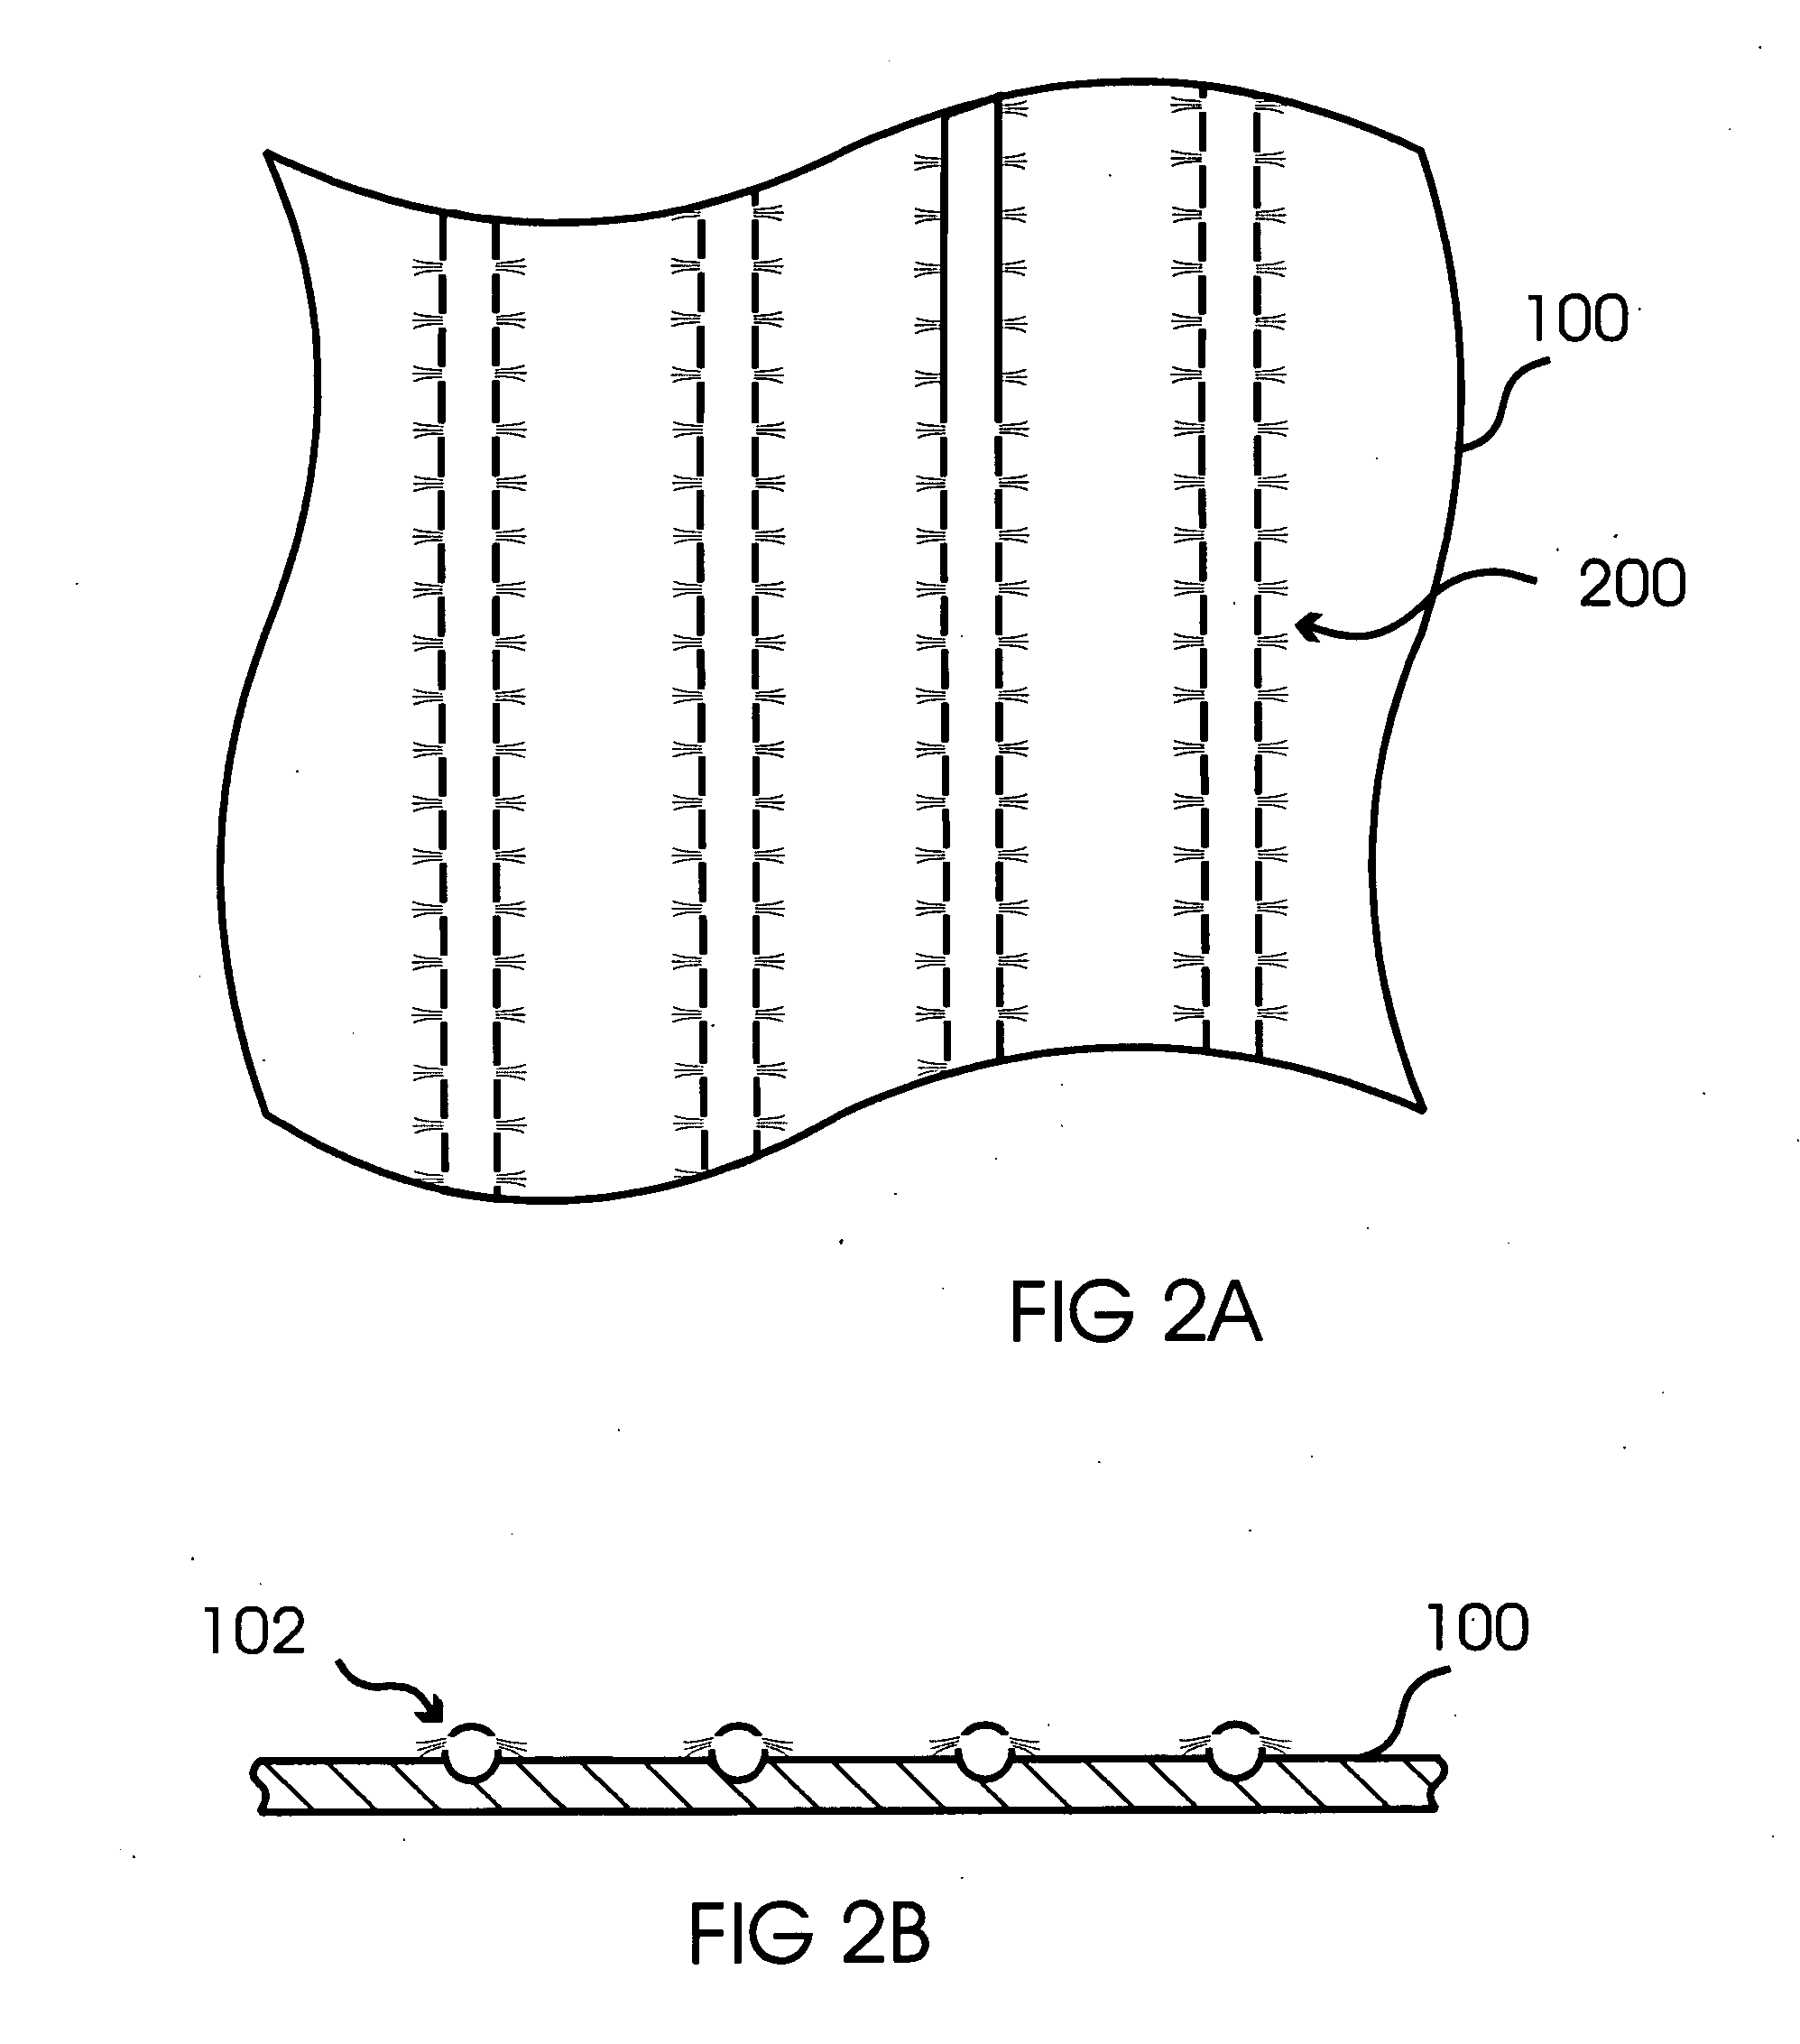 Garment Having a Vascular System for Facilitating Evaporative Cooling of an Individual